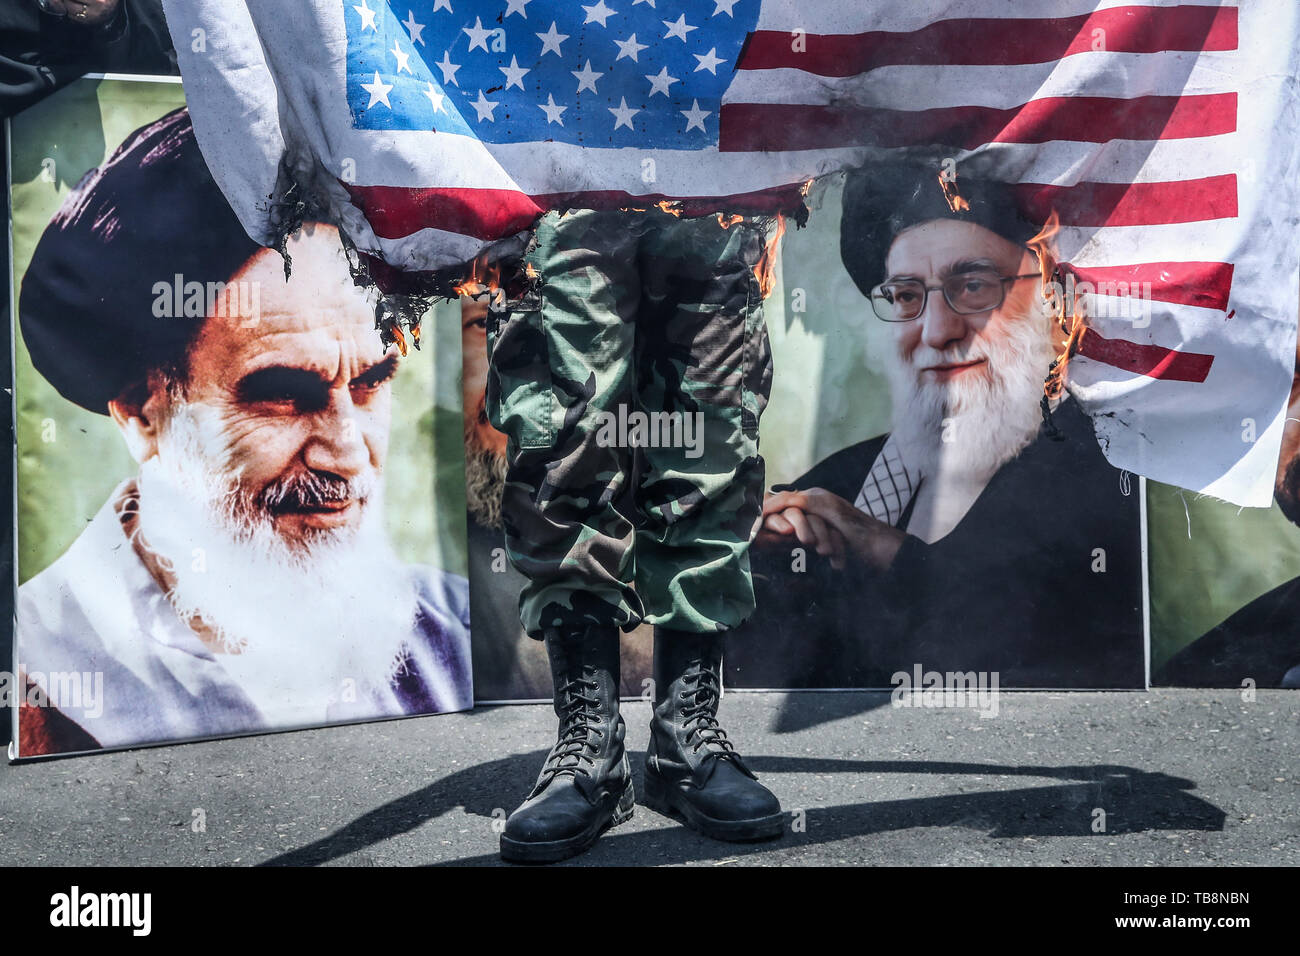 Tehran, Iran. 31st May, 2019. An Irani man burns the American flag during a protest marking the annual al-Quds Day (Jerusalem Day) on the last Friday of the Muslim holy month of Ramadan. Credit: Saeid Zareian/dpa/Alamy Live News Stock Photo